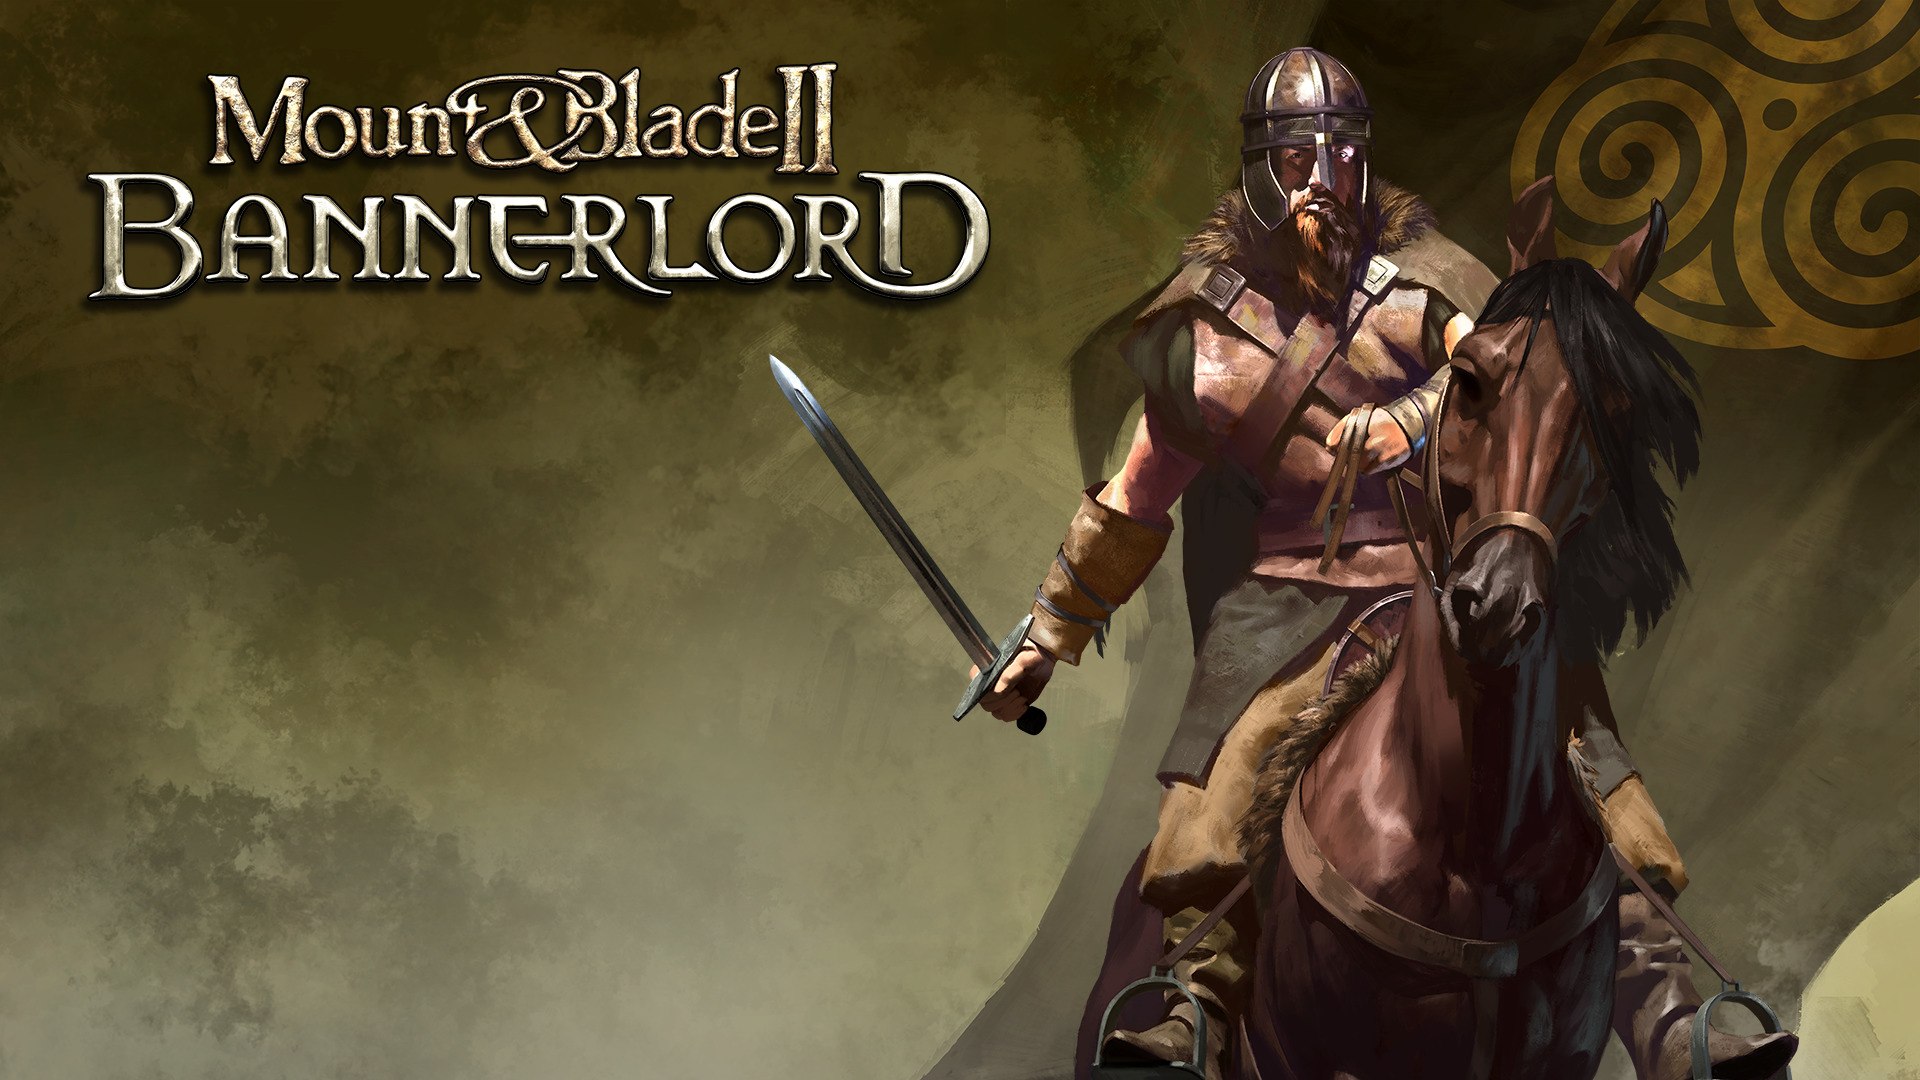 Video Game Mount & Blade II: Bannerlord HD Wallpaper | Background Image